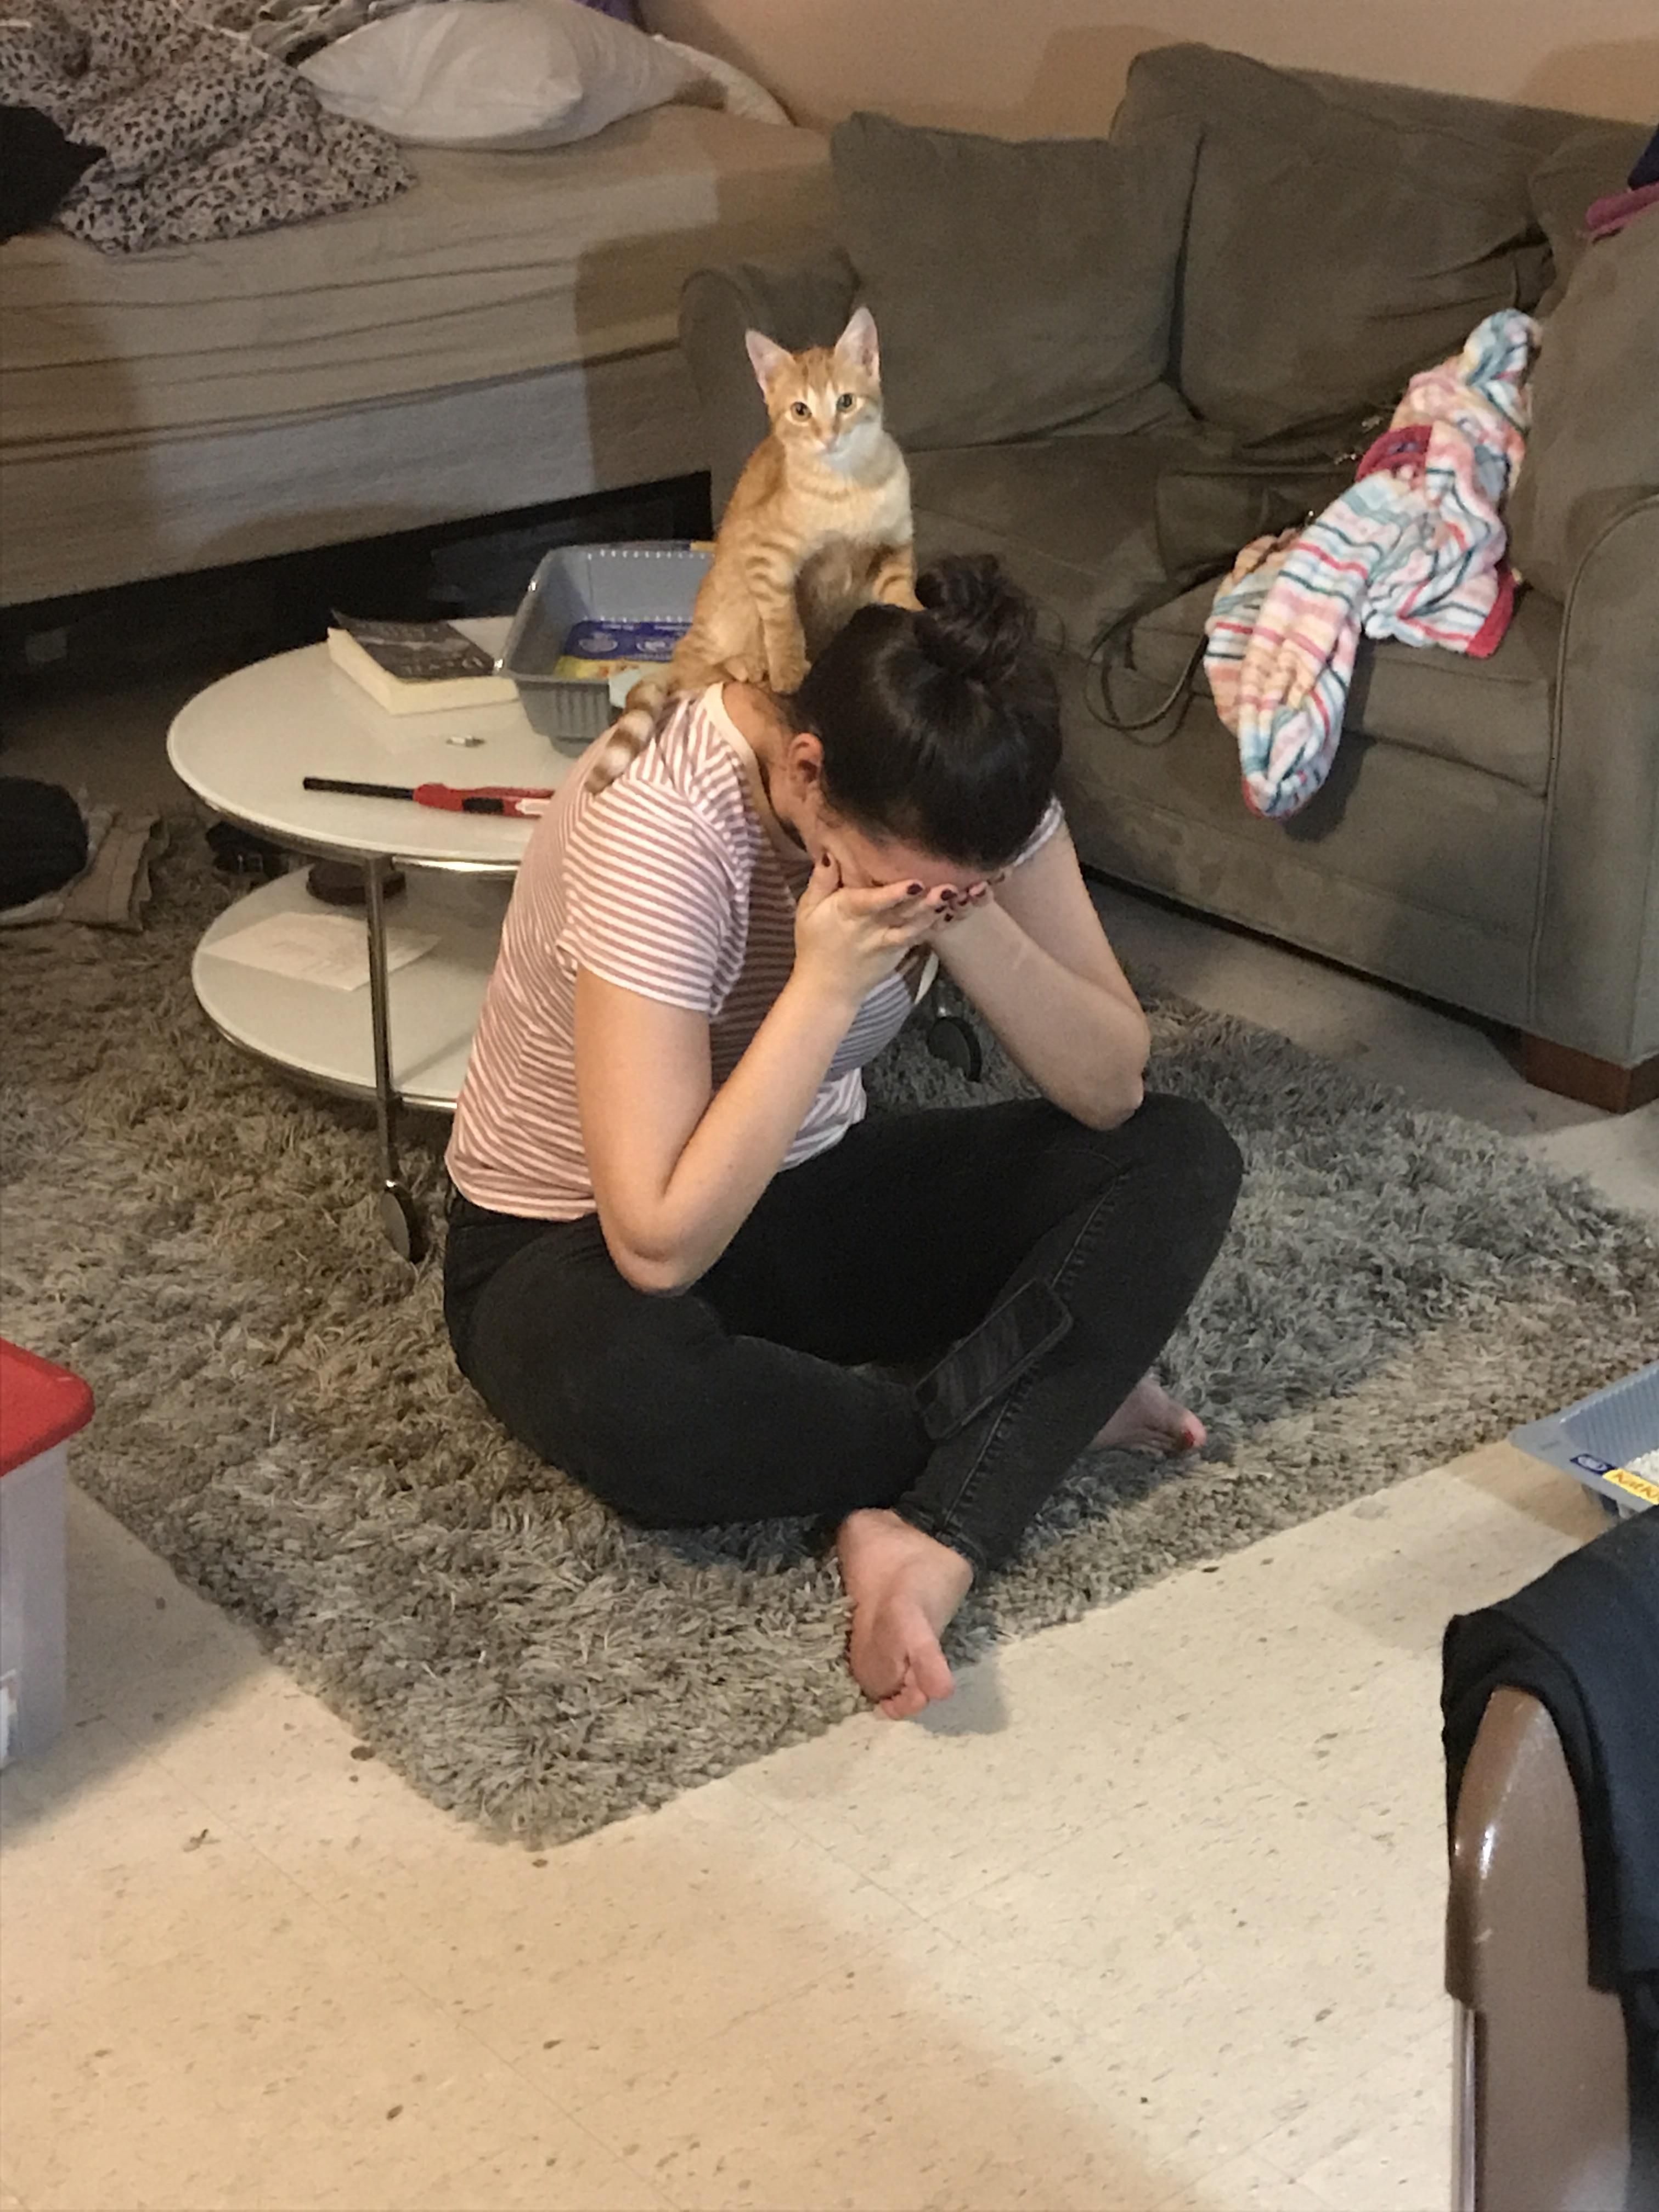 We found a home for a stray kitten we picked up last week. My friend is not adjusting to him leaving her apartment very well.